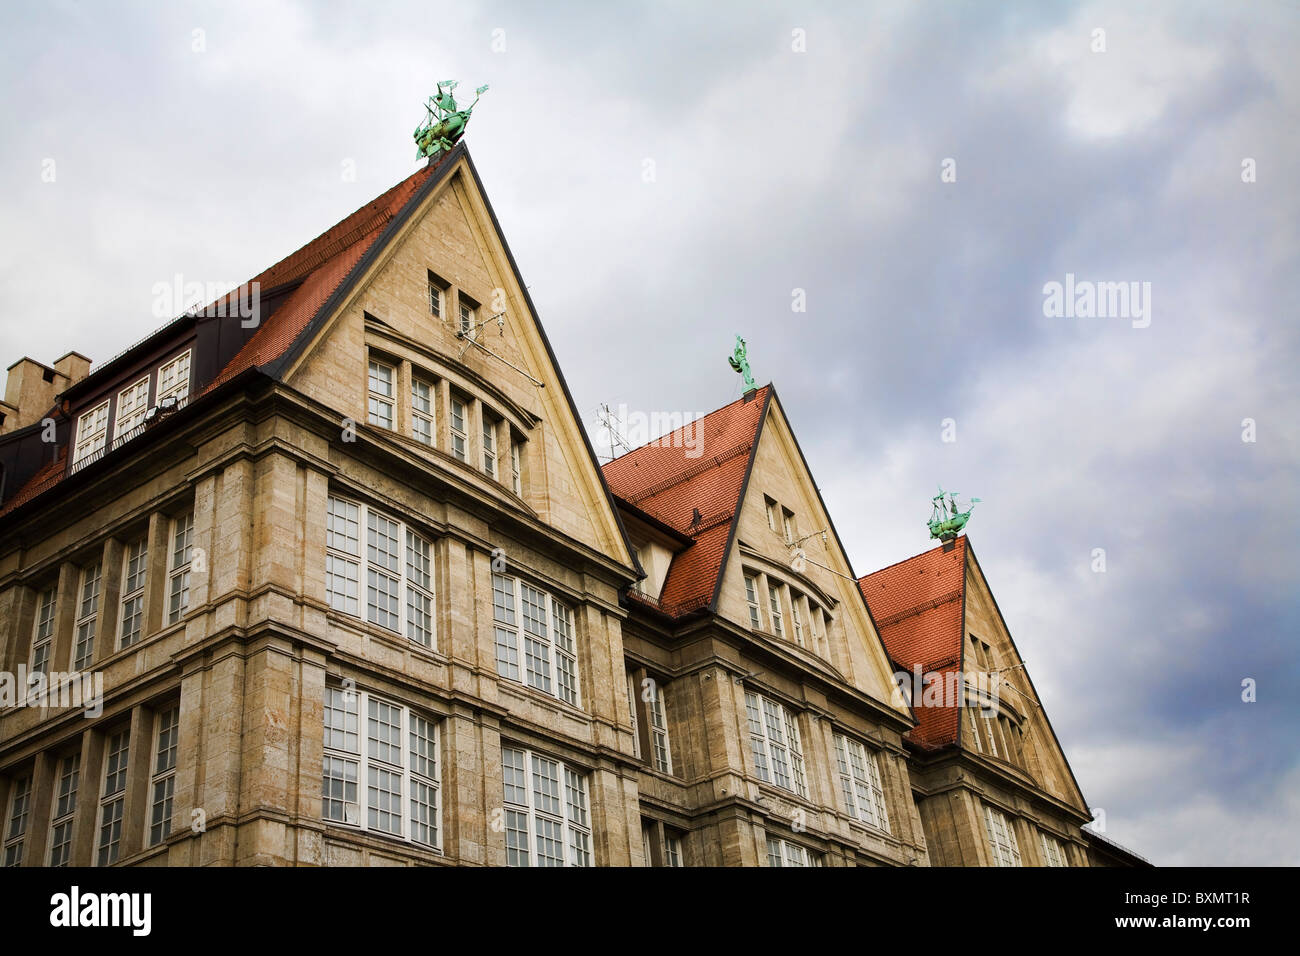 The Kaufhaus Oberpollinger in Munich, Germany. Stock Photo